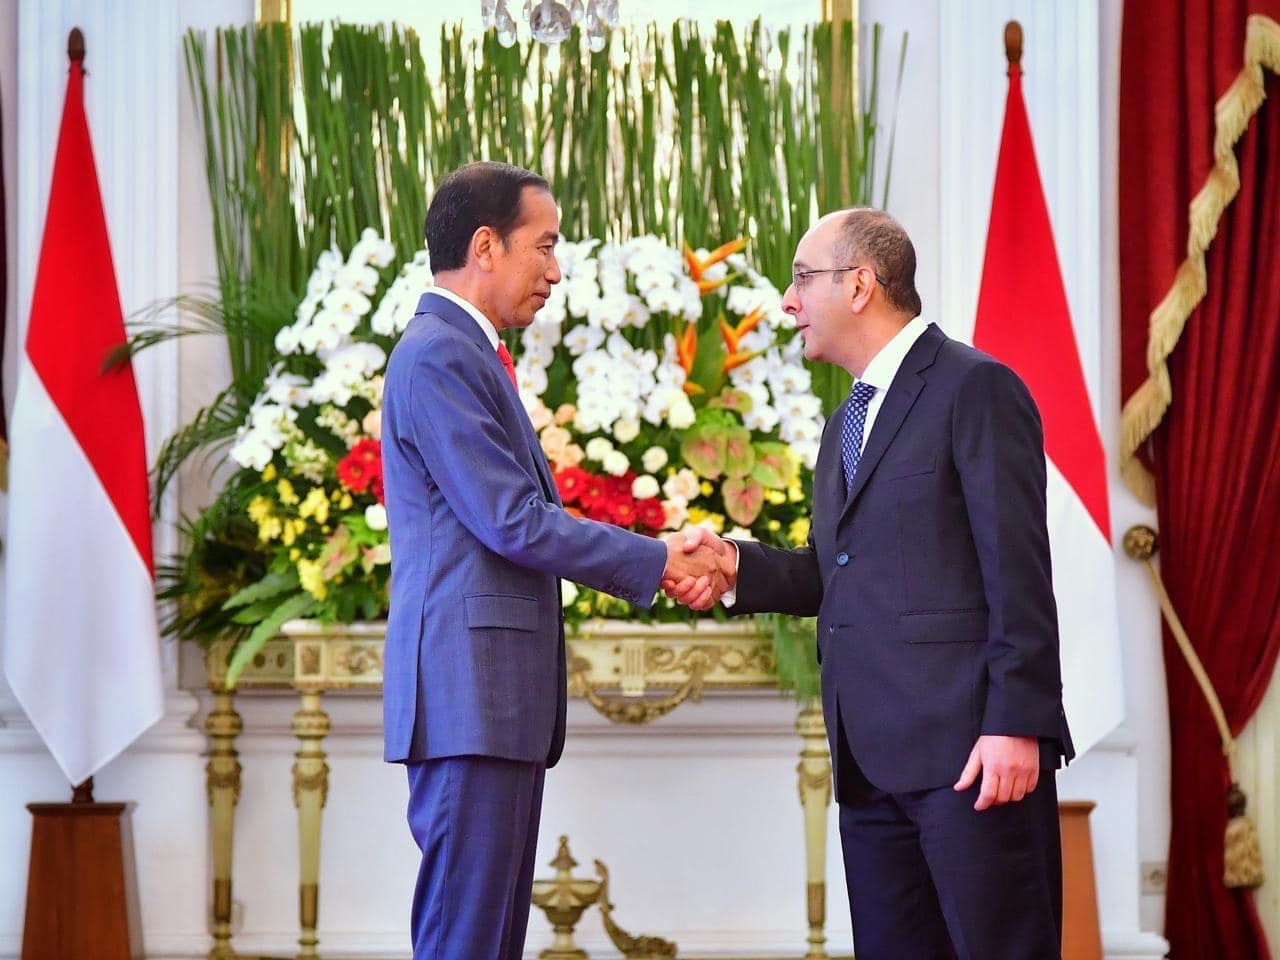 The Indonesian President: Egypt is our pivotal partner in the Middle East and Africa